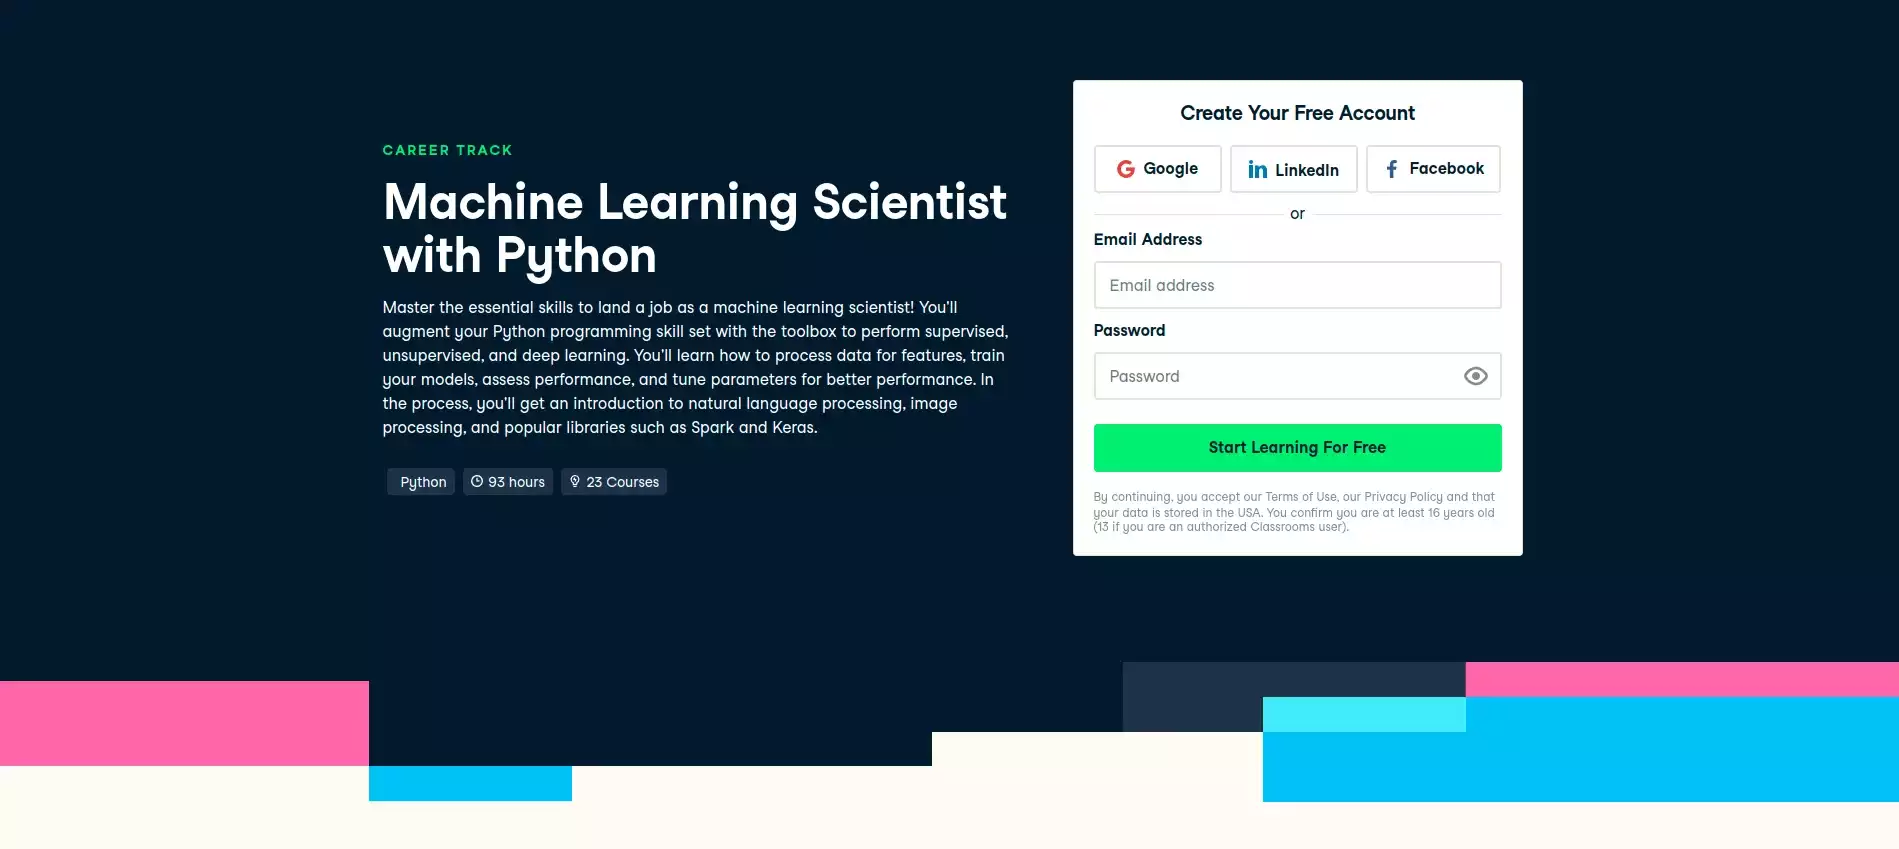 Machine learning scientist with python